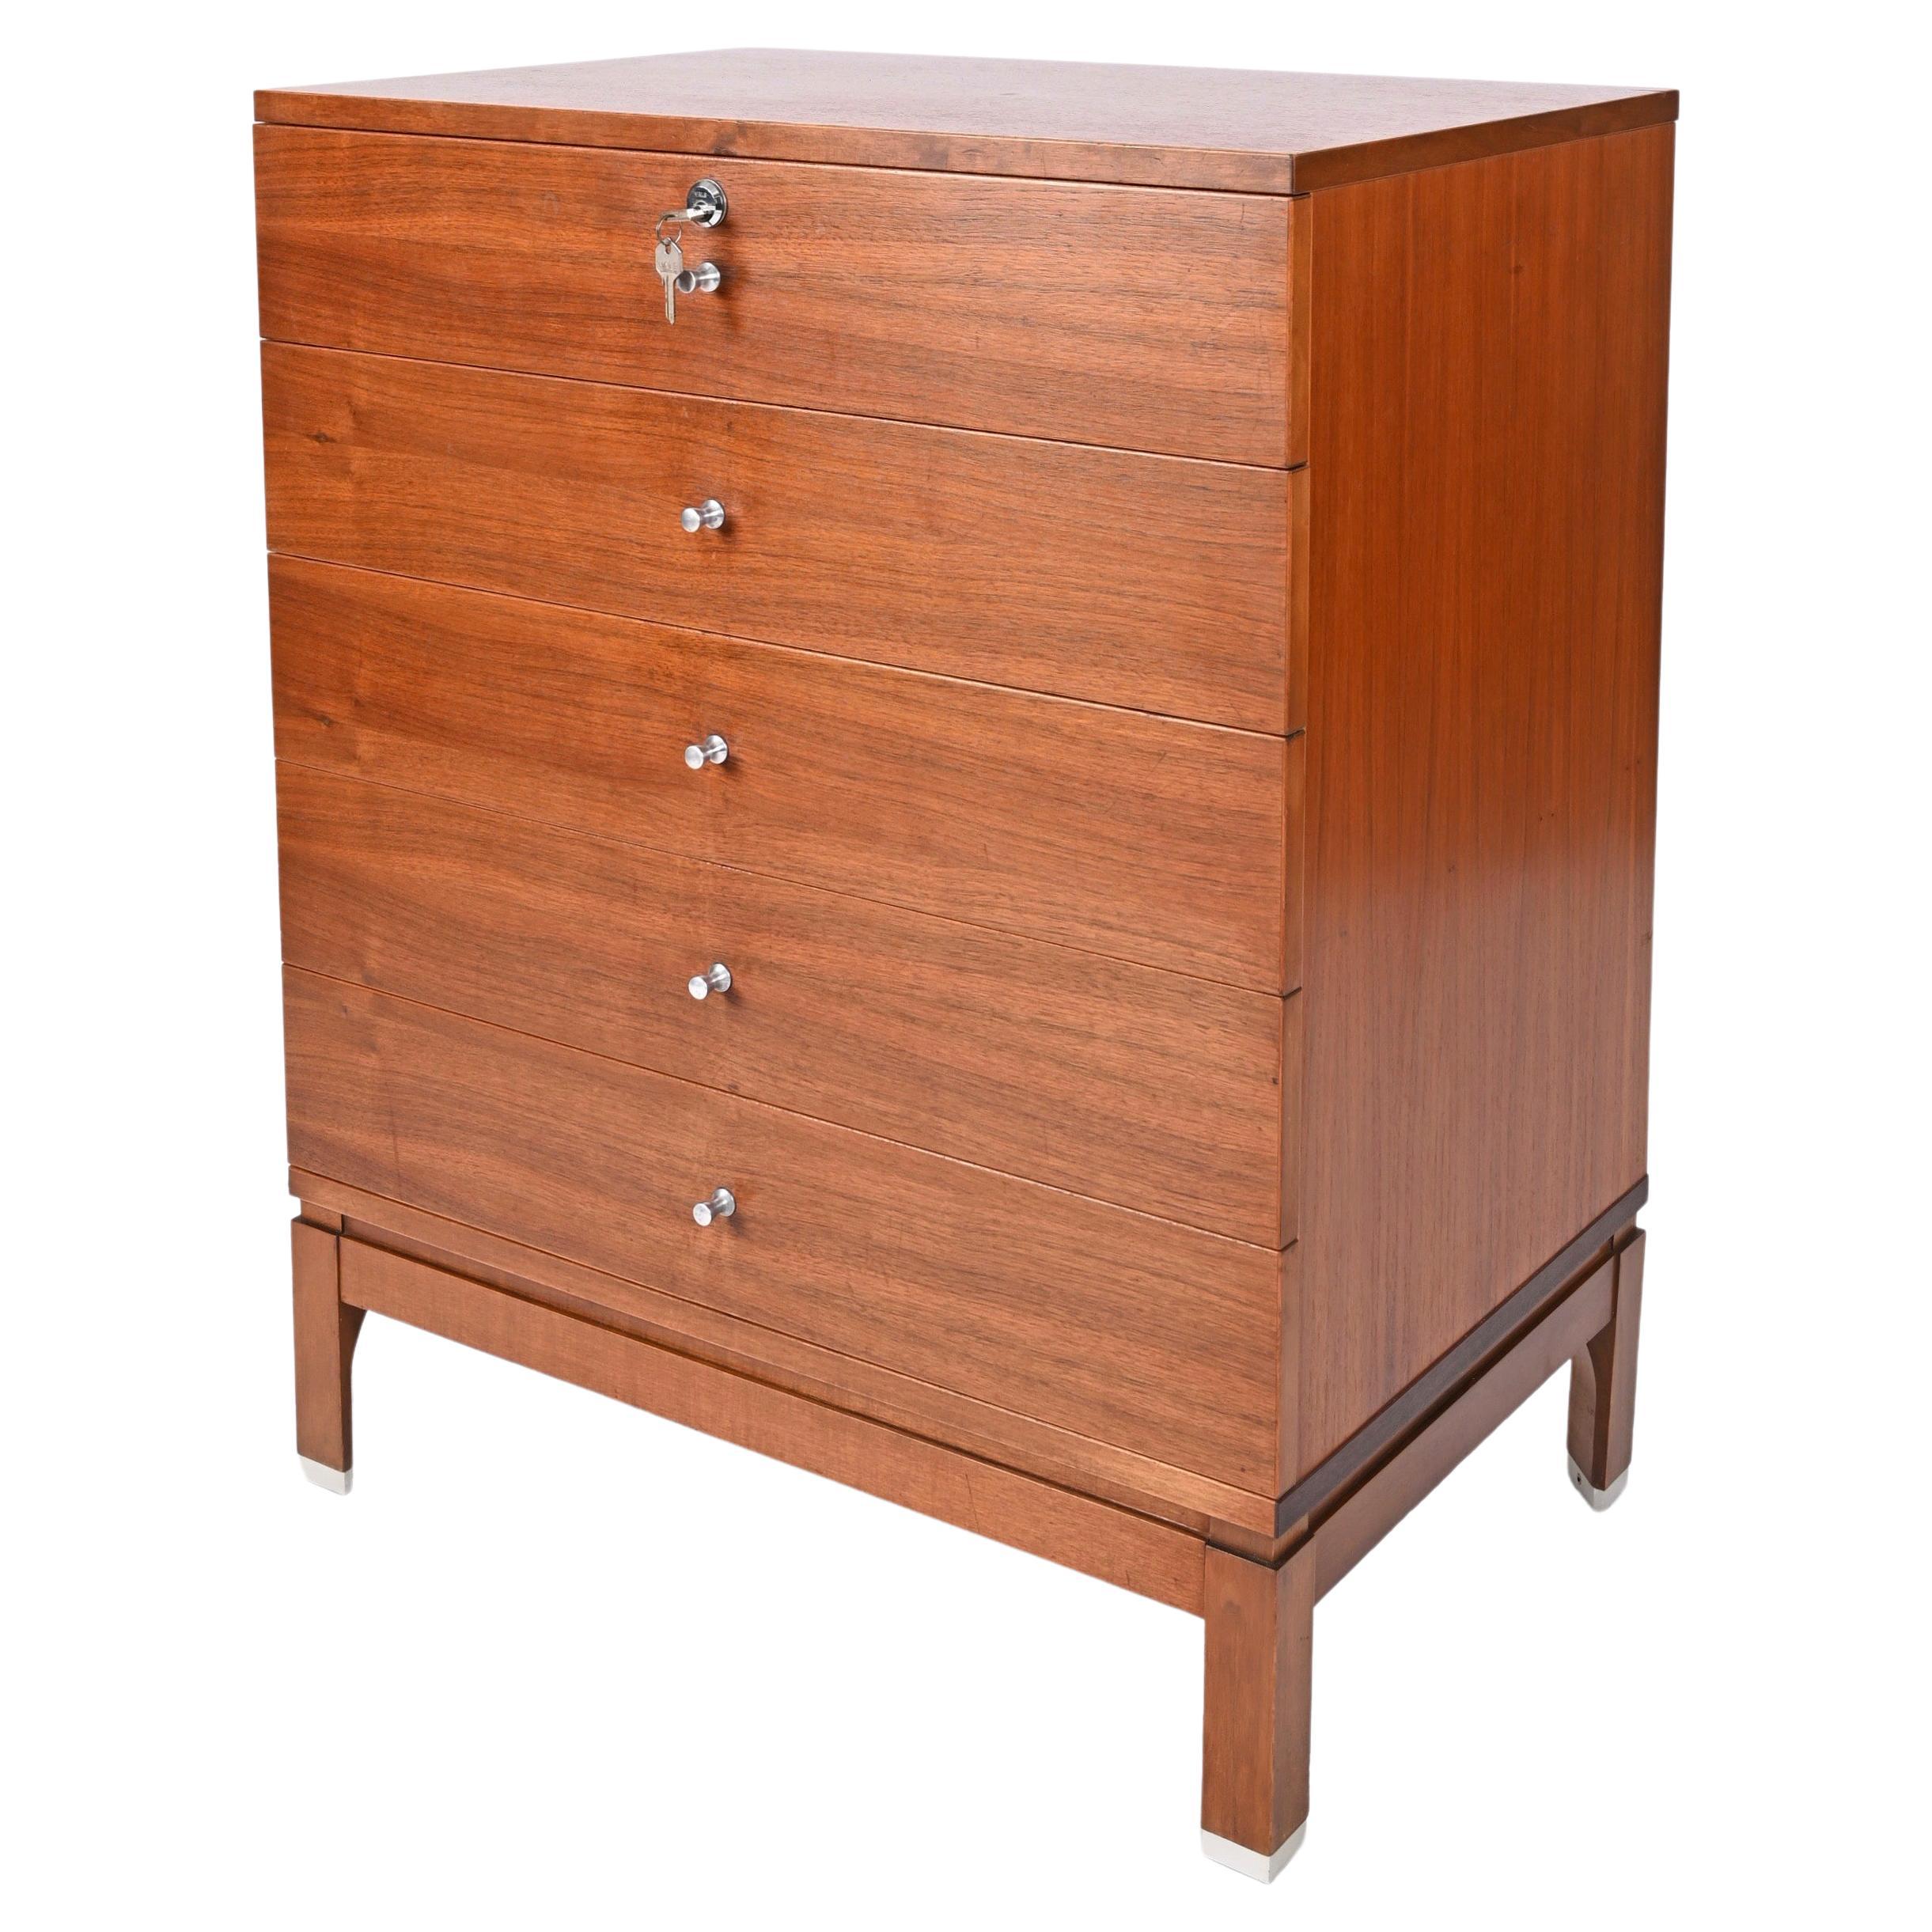 Mid-Century Chest of Drawers in Walnut by Ico Parisi for MIM Roma, Italy 1960s